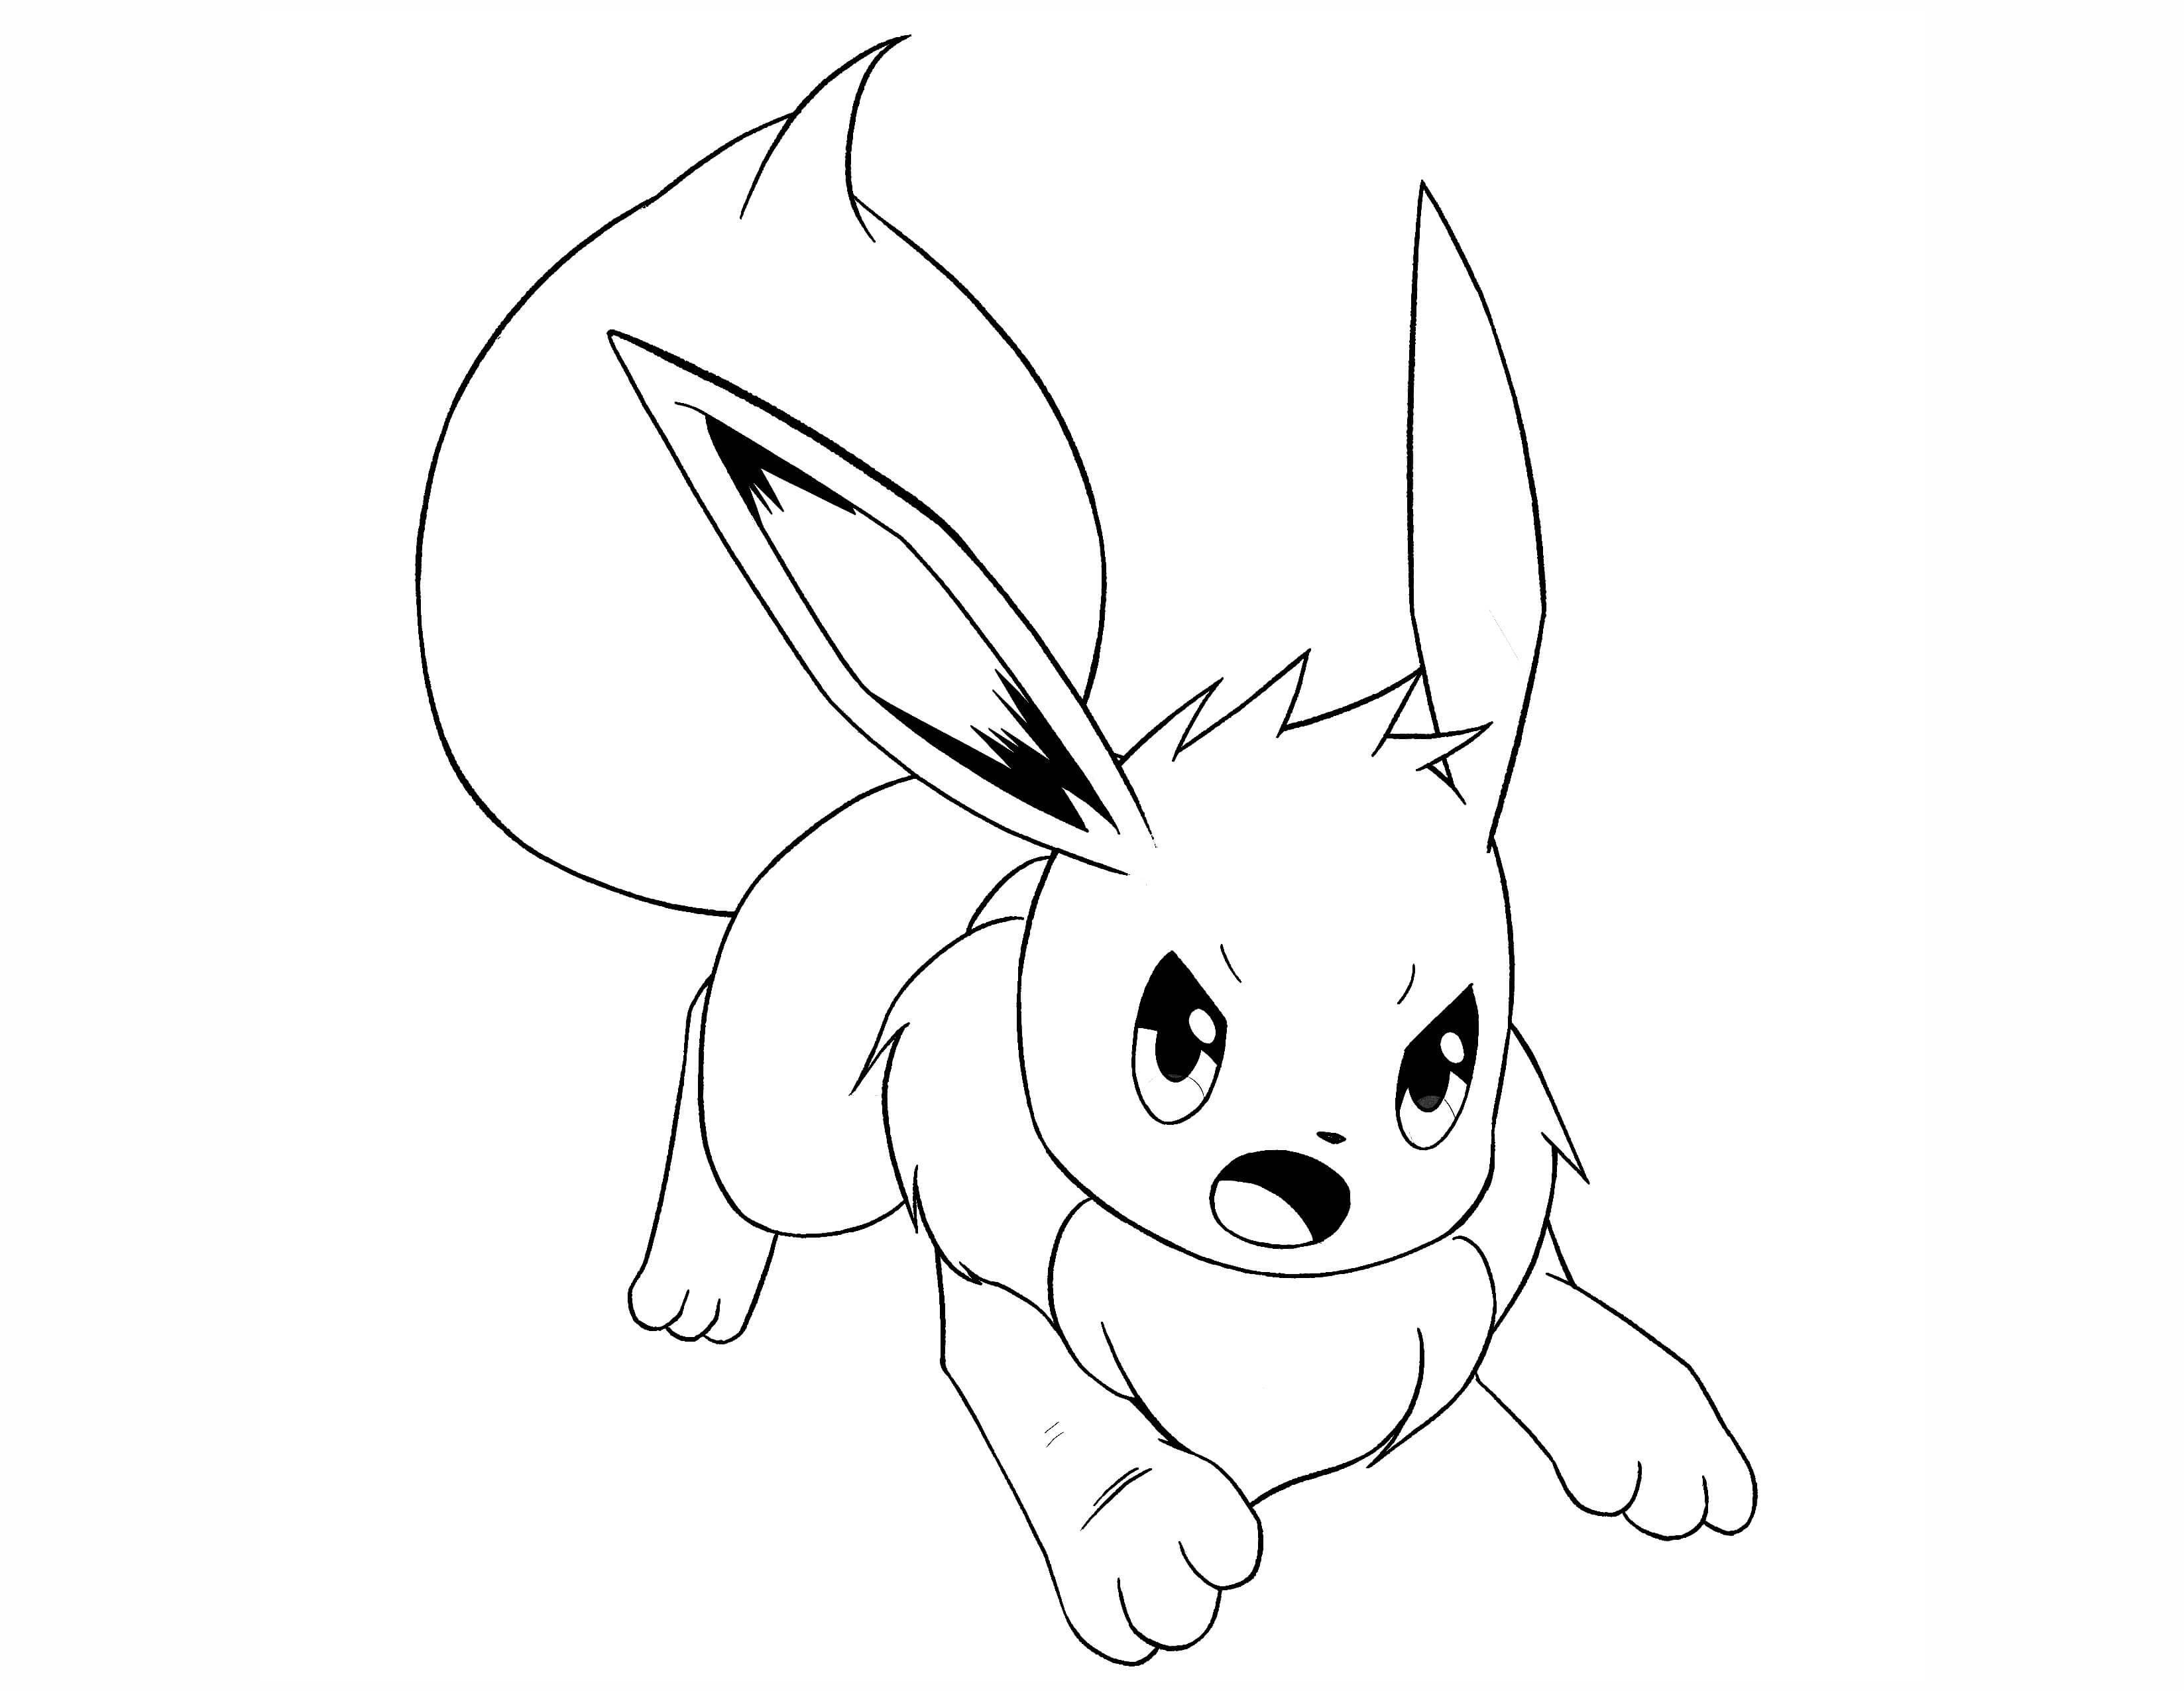 Free Eevee Pokemon Coloring Pages, Download Free Eevee Pokemon Coloring